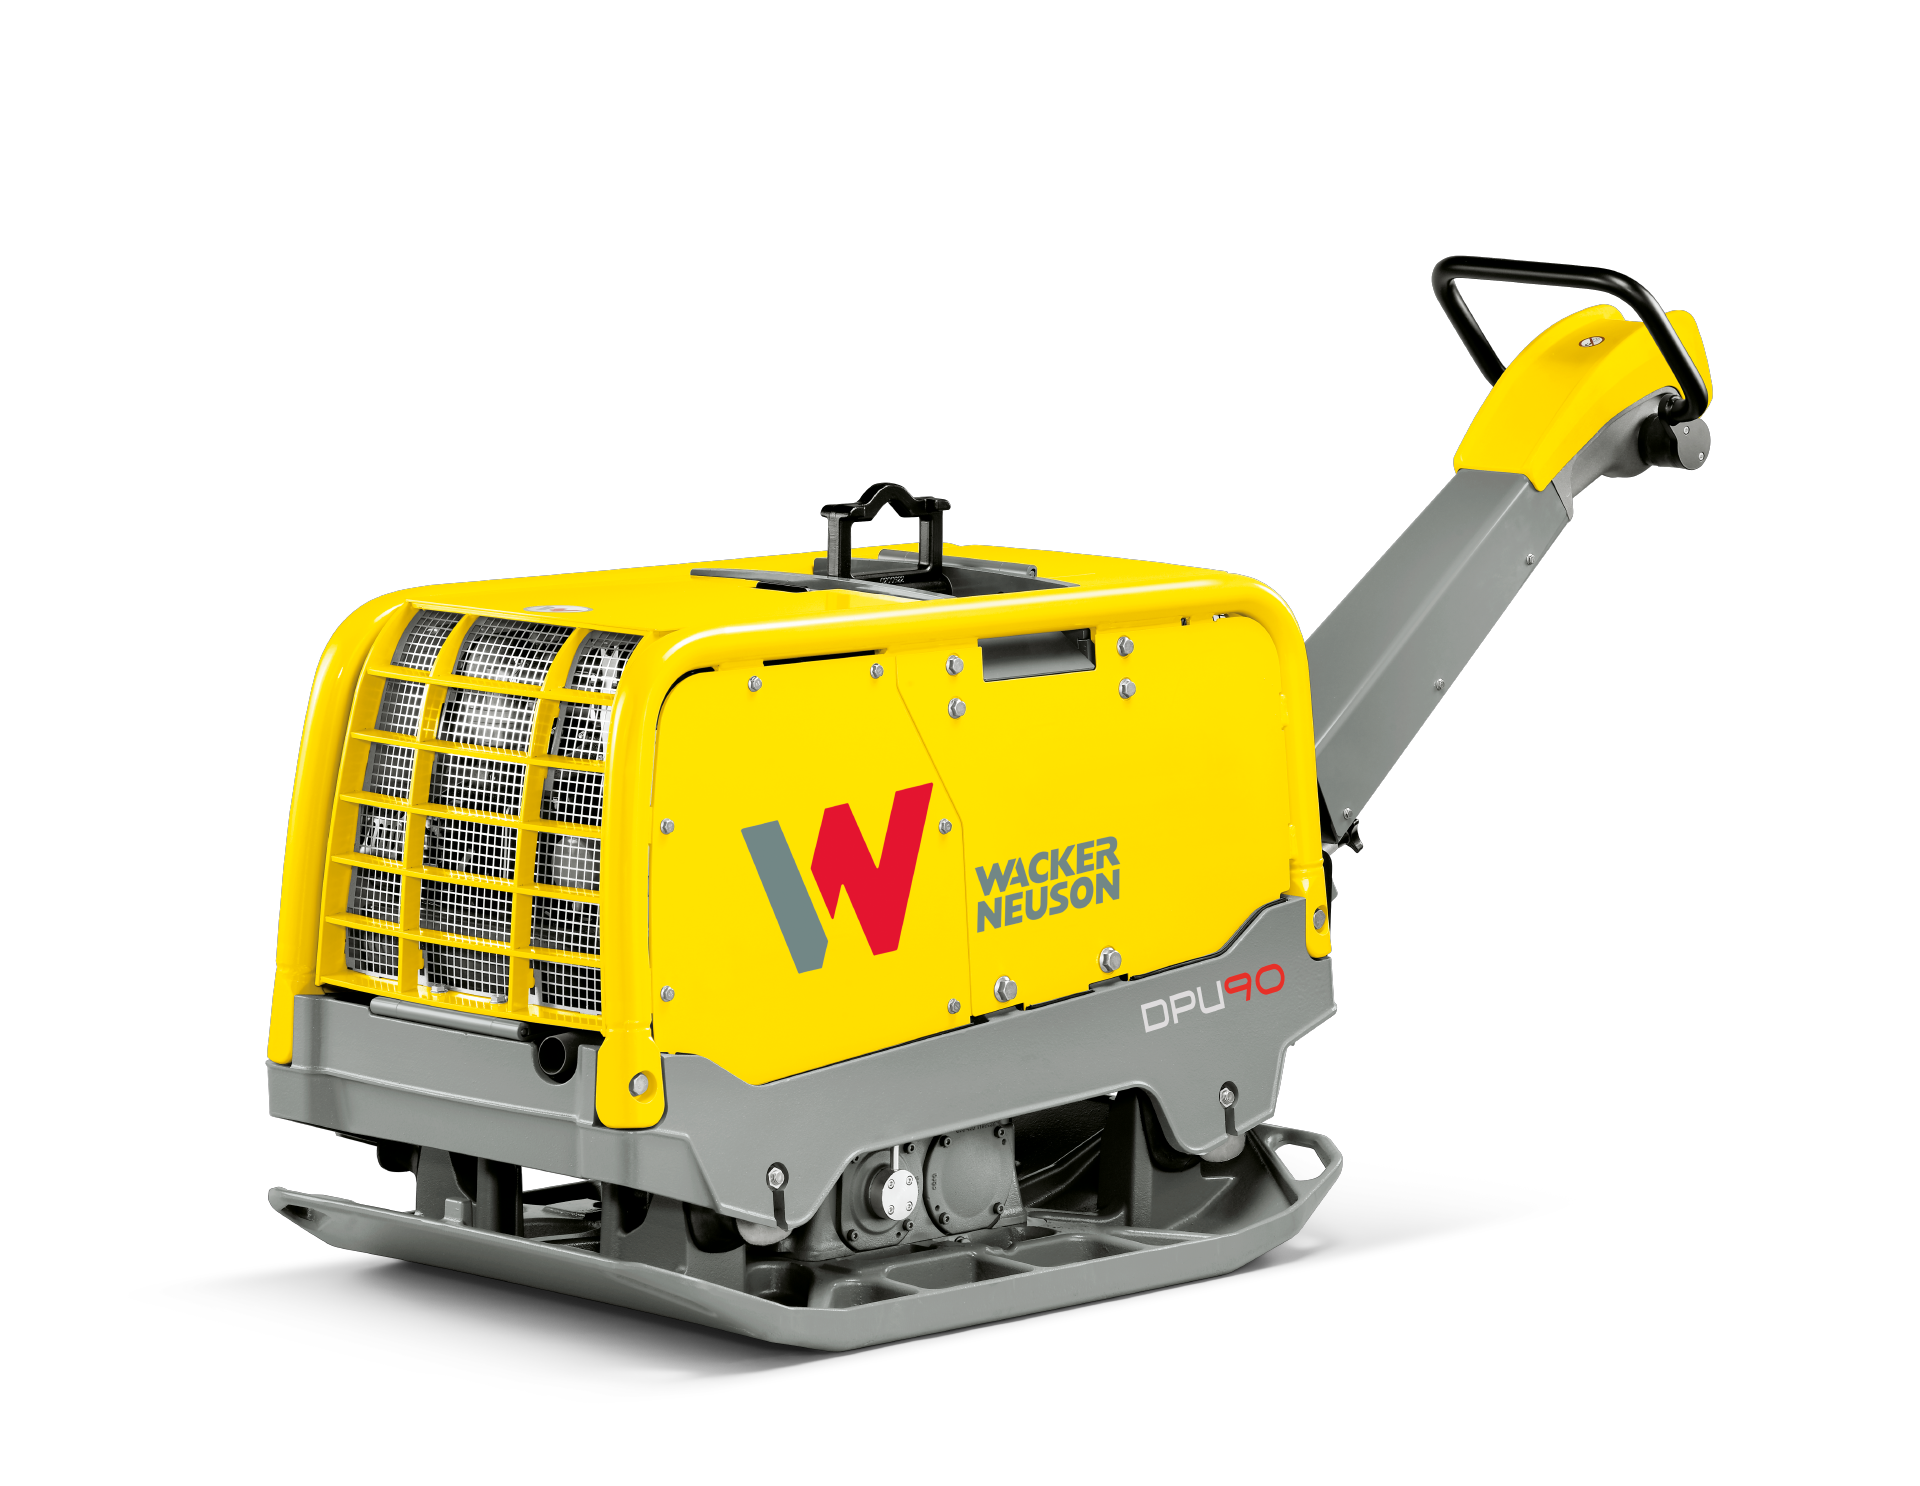 Remote controlled Vibratory Plate with water-cooled Kohler diesel engine